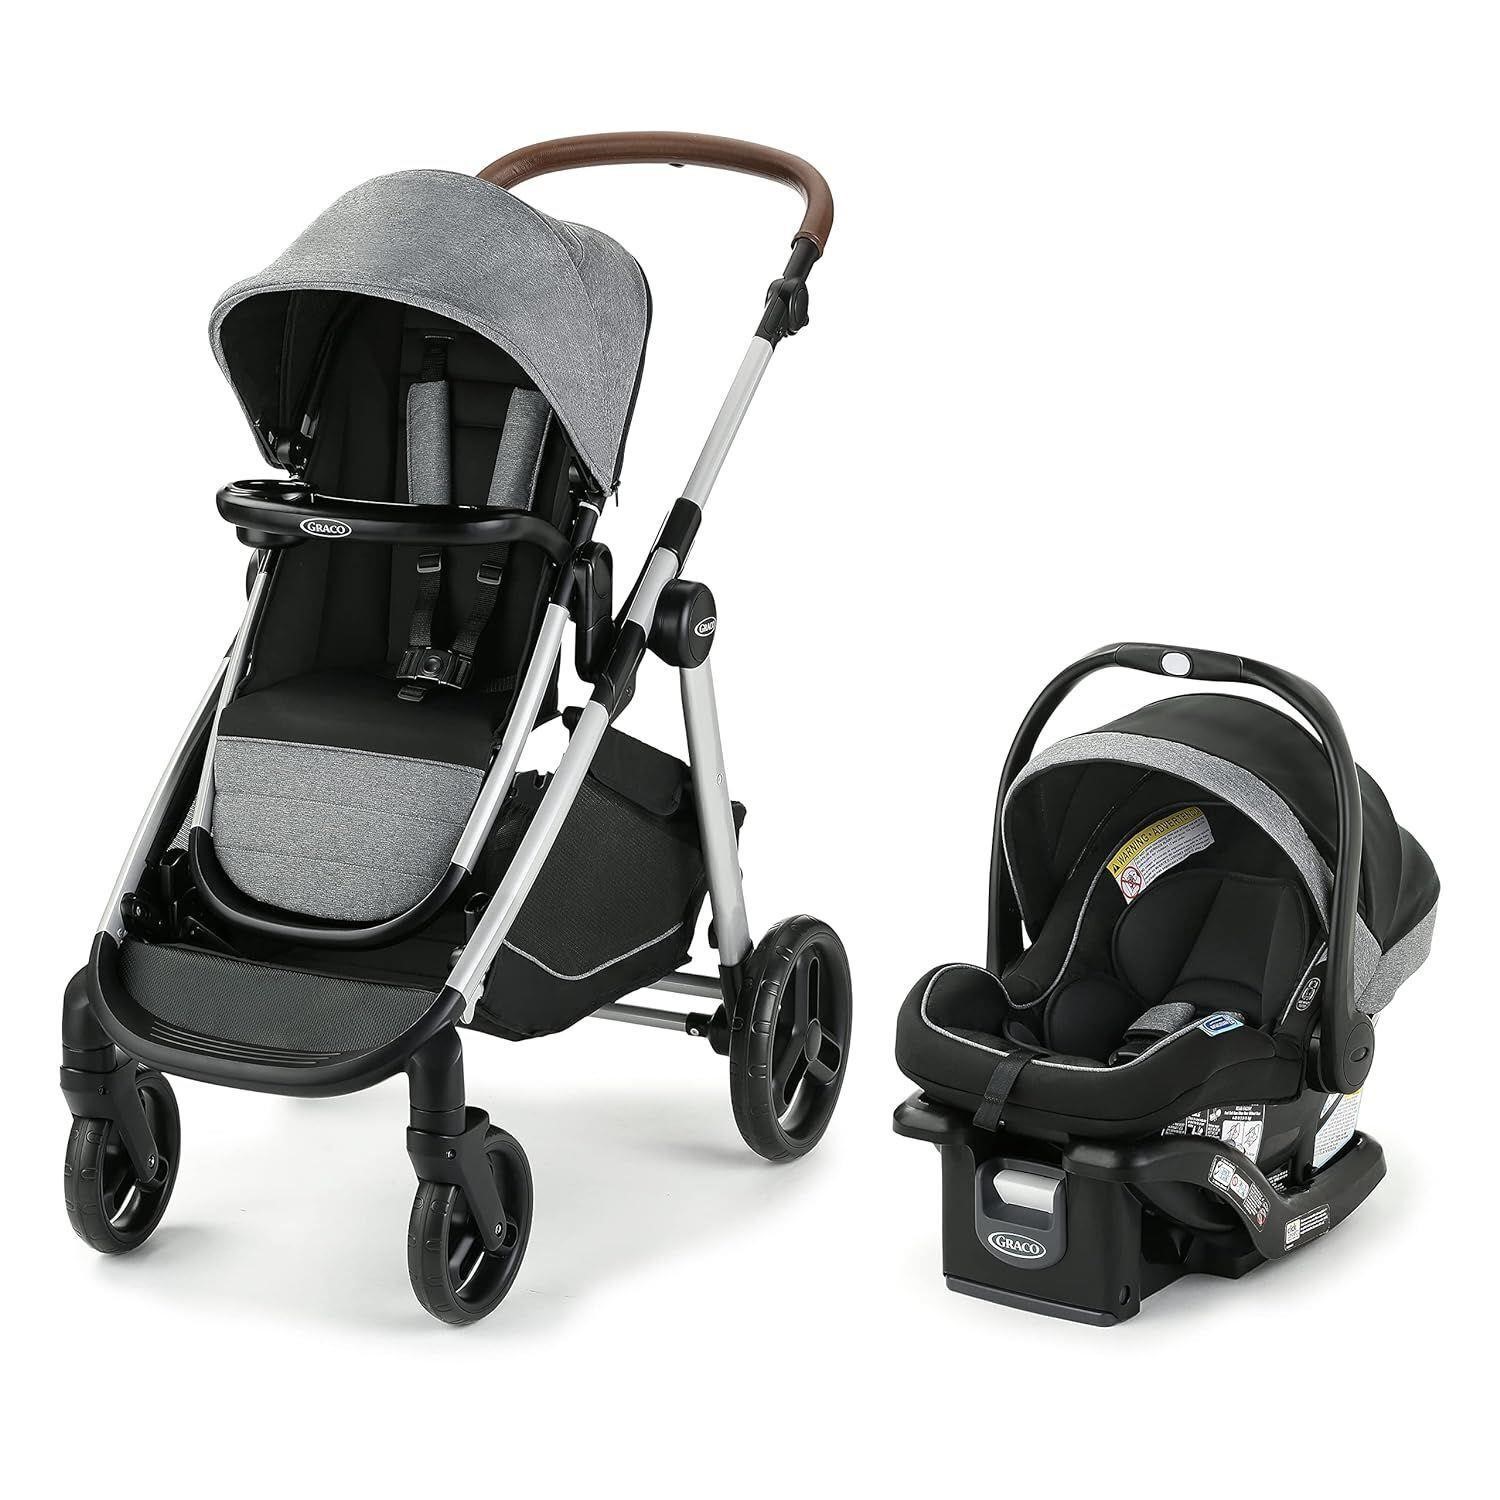 ***$499 - Graco® Modes™ Nest2Grow™ Travel System